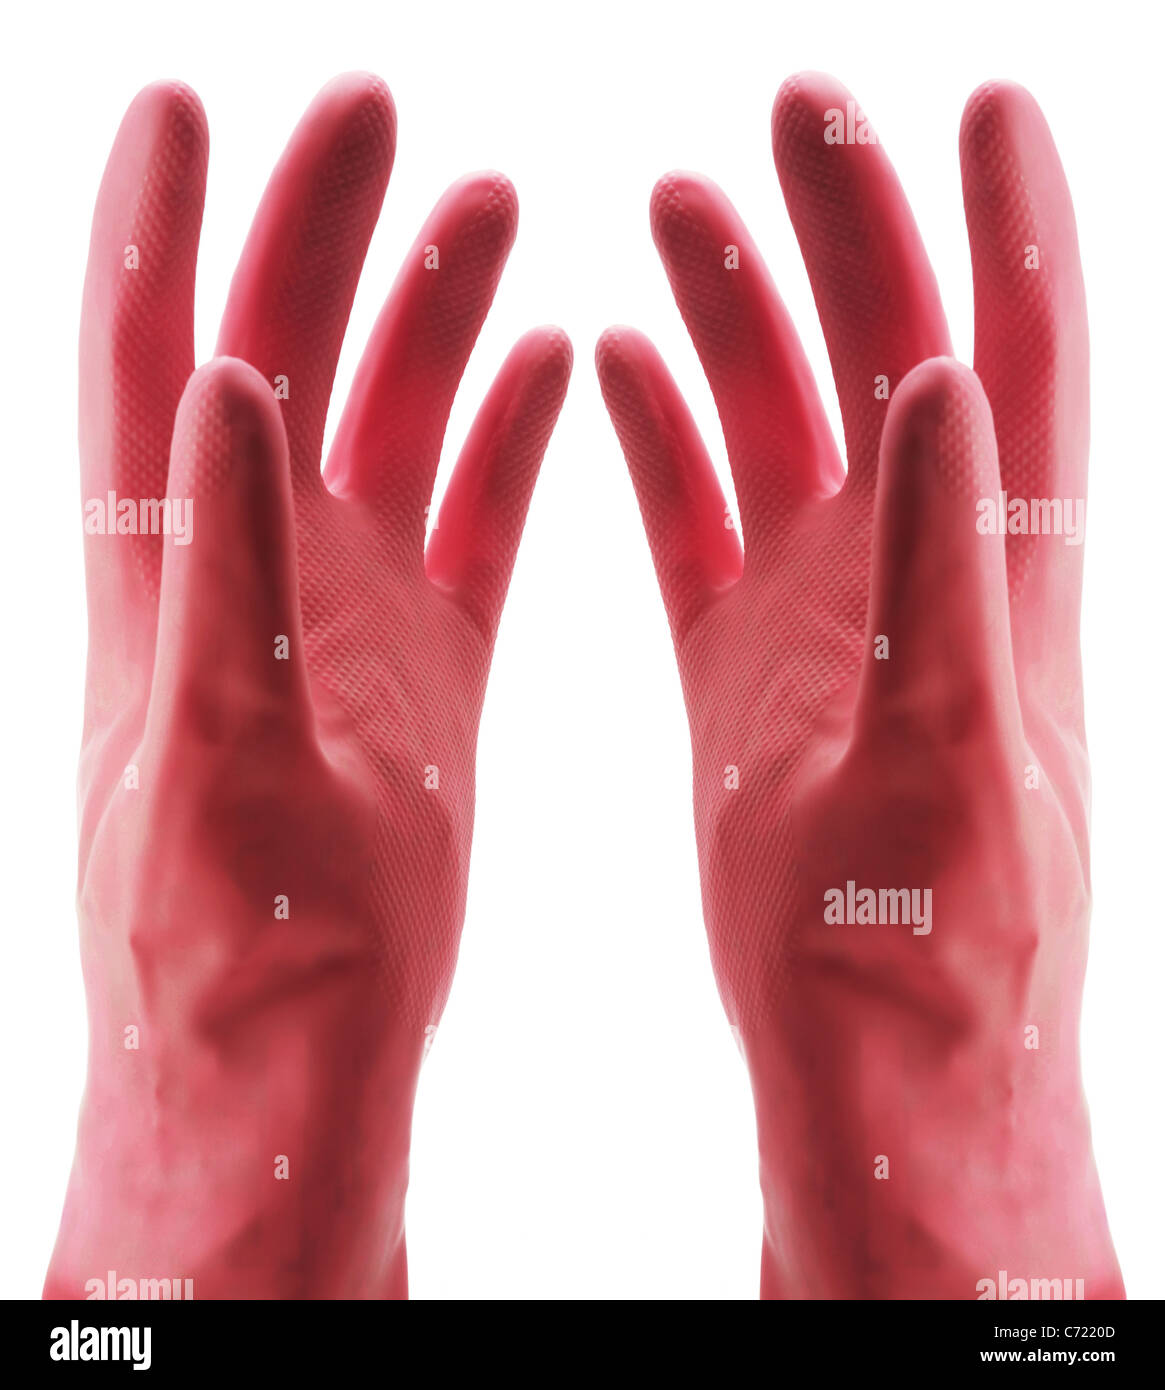 Rubber Gloves Stock Photo